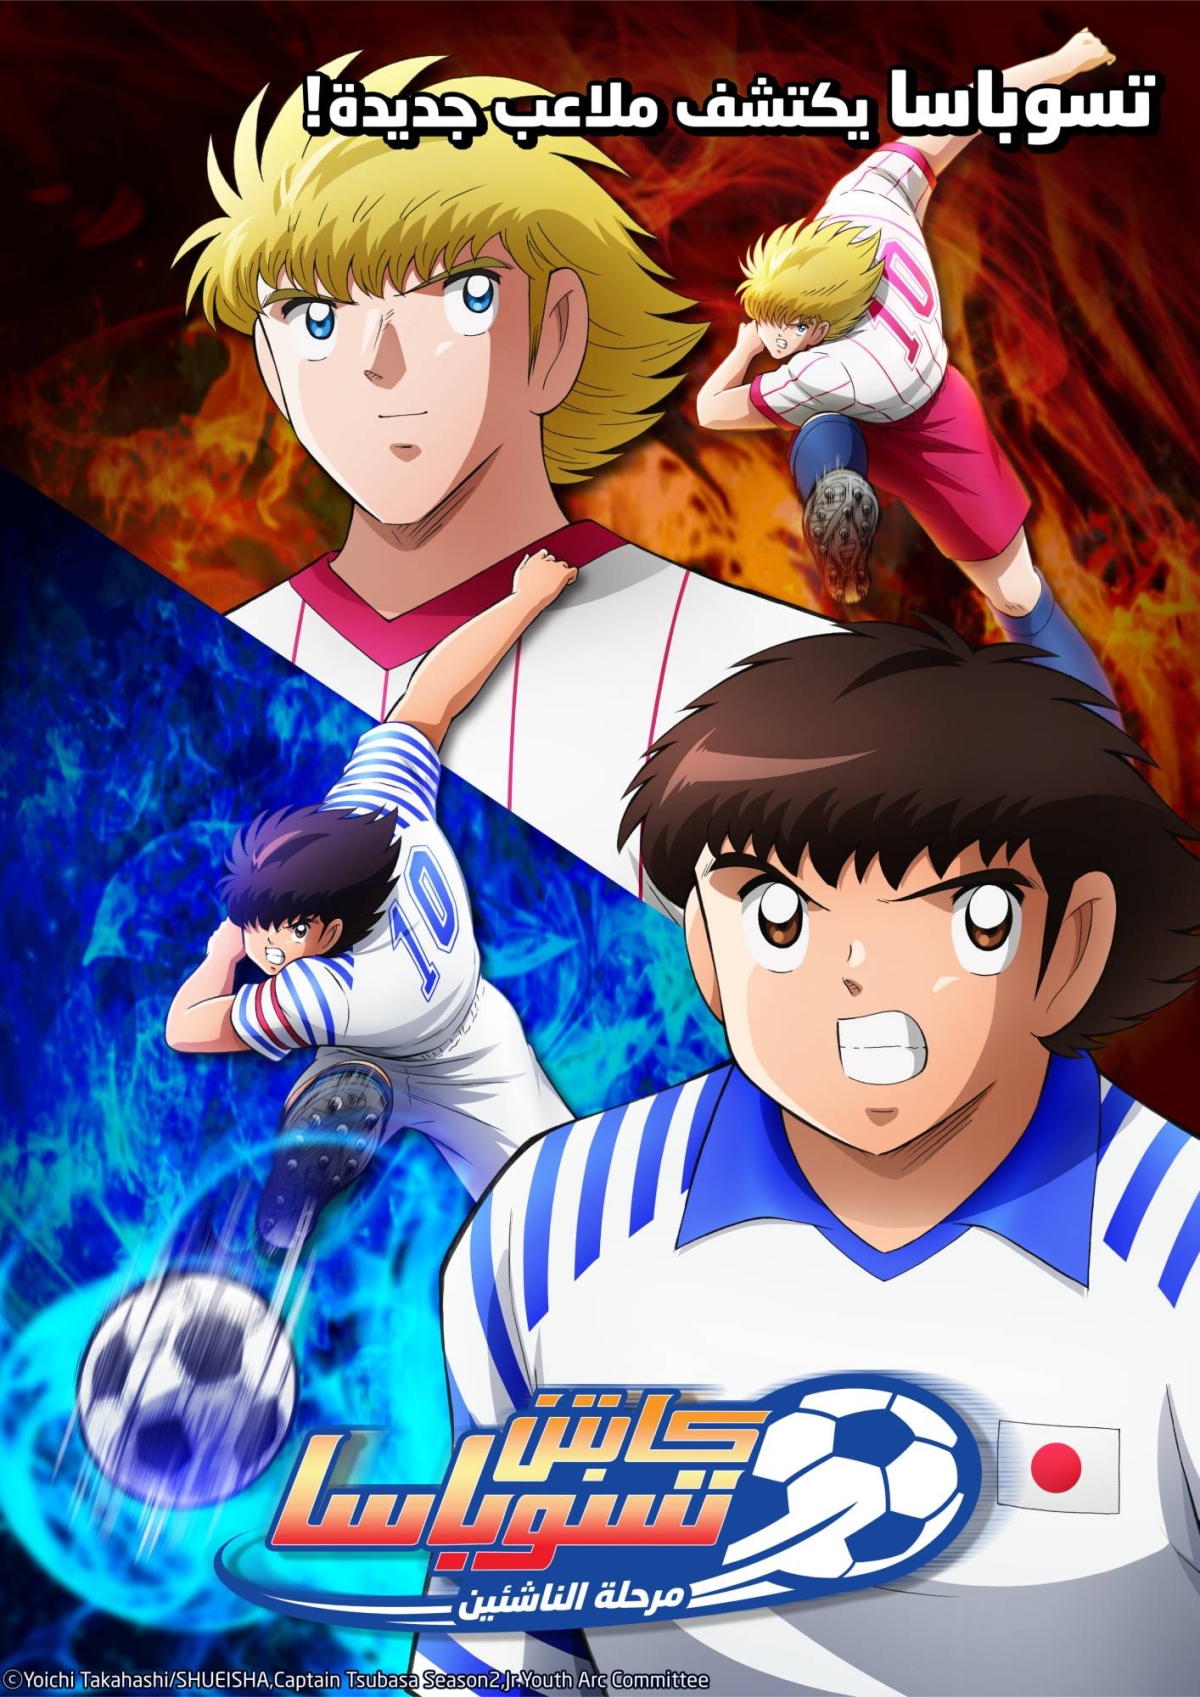 Manga Production Company Obtains Distribution Rights for Captain Tsubasa in the Middle East and North Africa